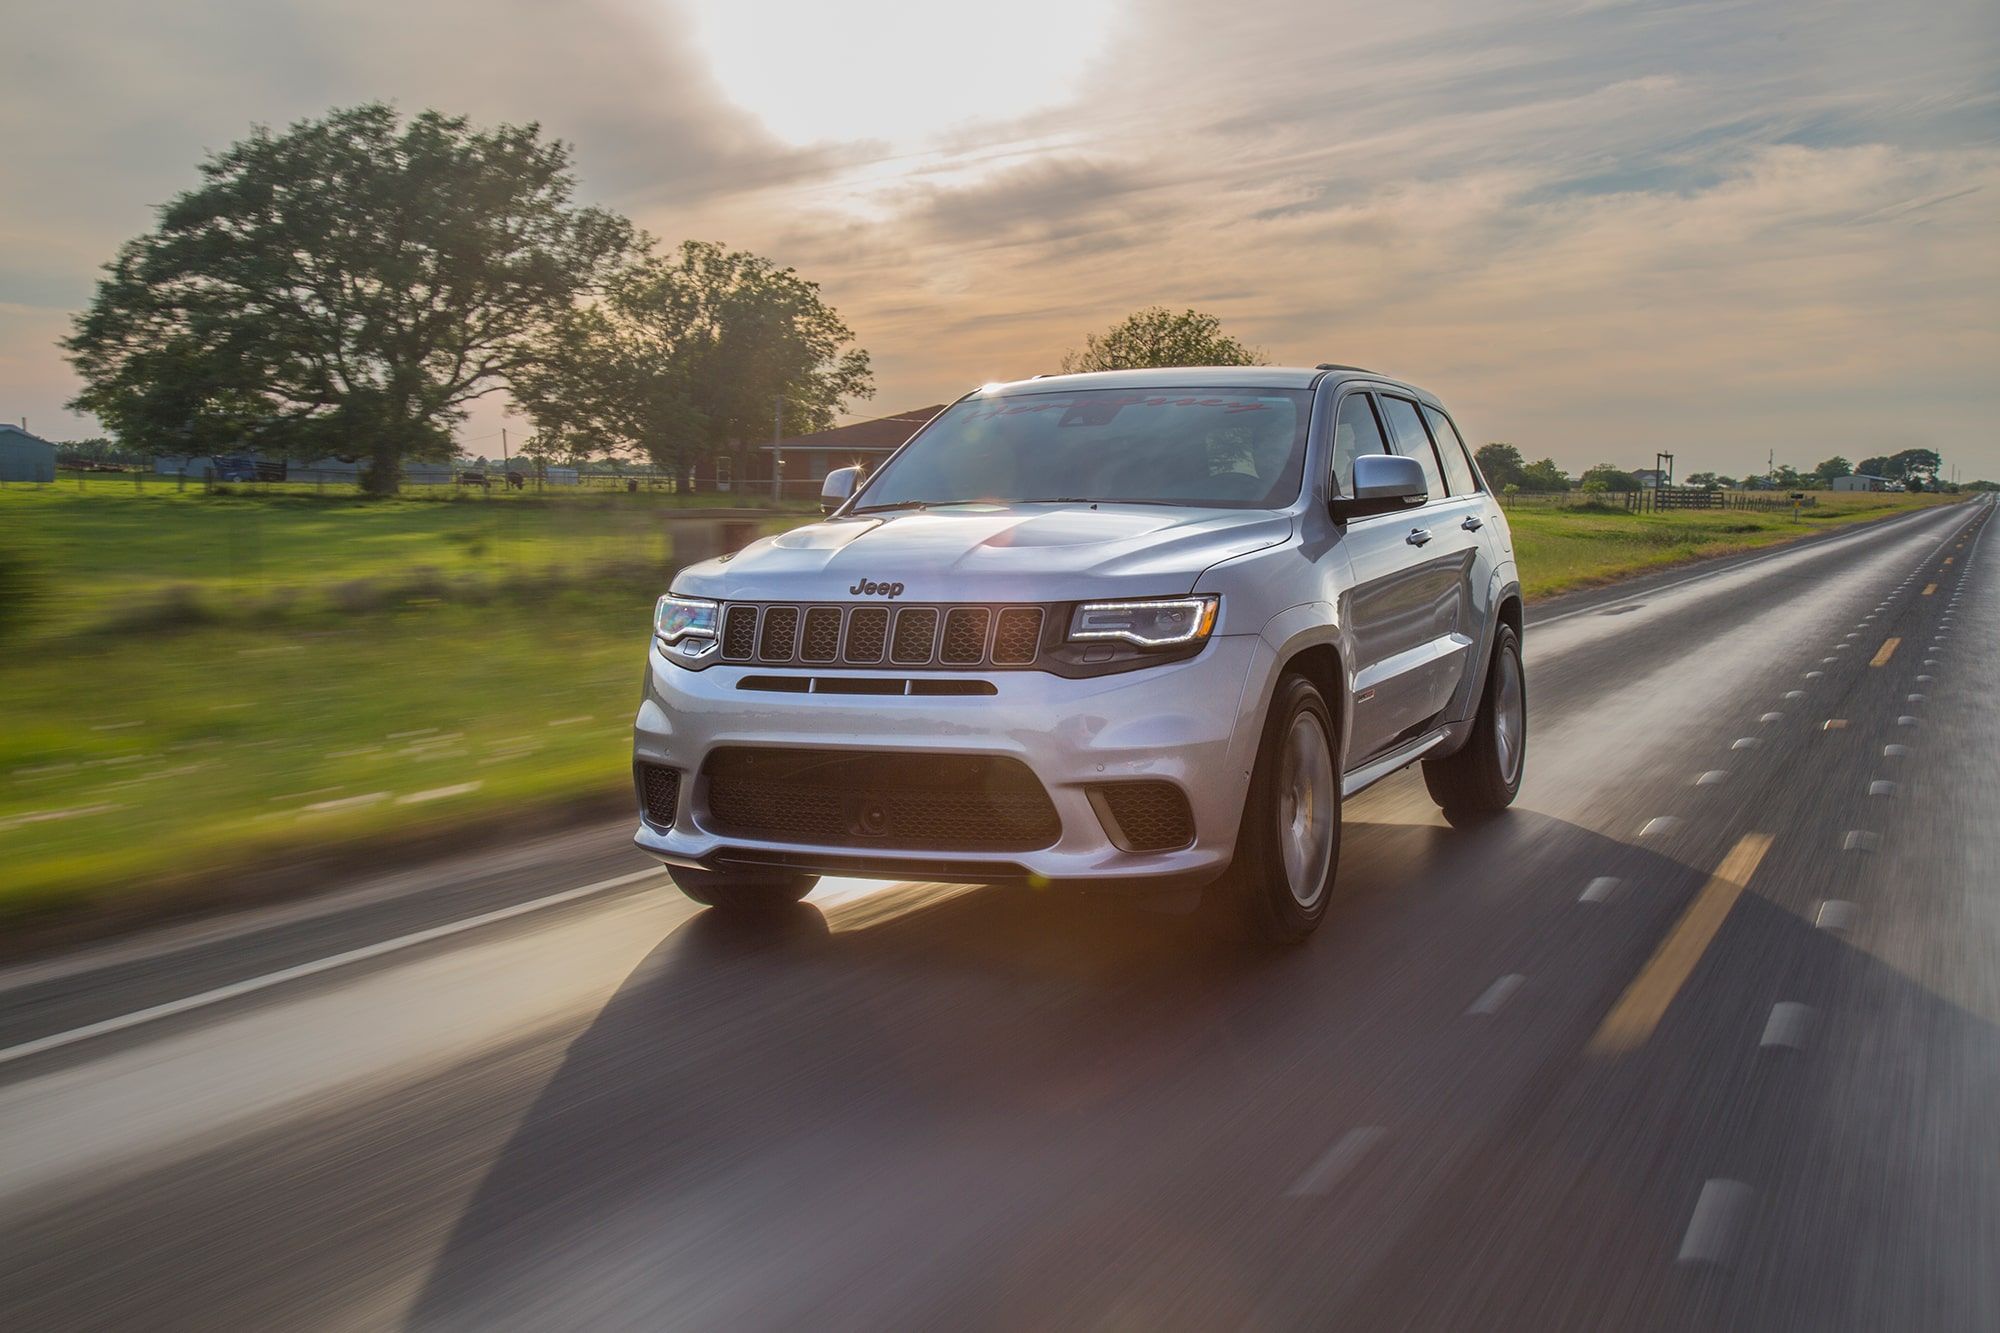 2018 Jeep Grand Cherokee Trackhawk by Hennessey